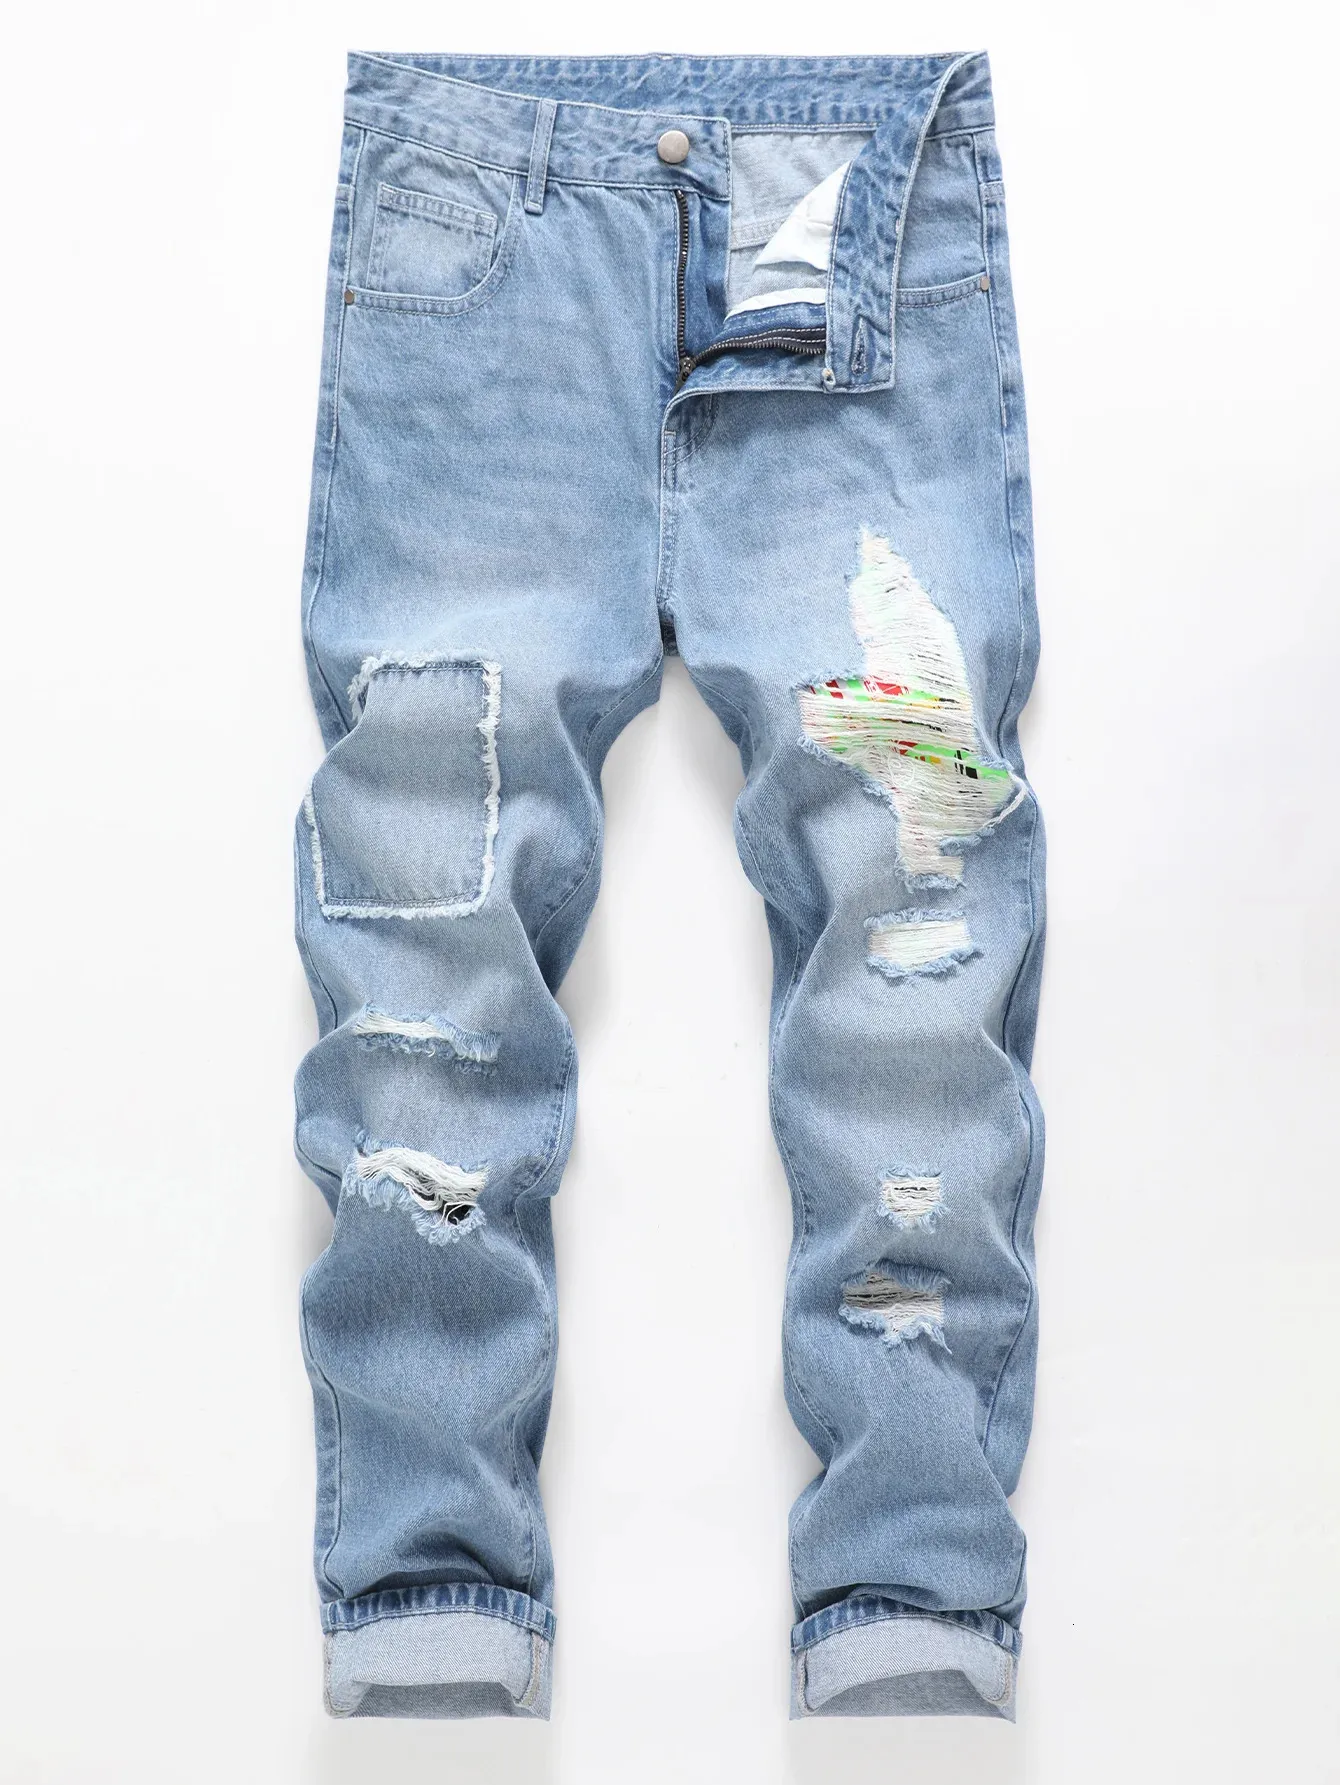 Herr Slim-Fit Non-Stretch Cotton Causal Fashion Slashed and Ripped Denim Pants Jeans 240124